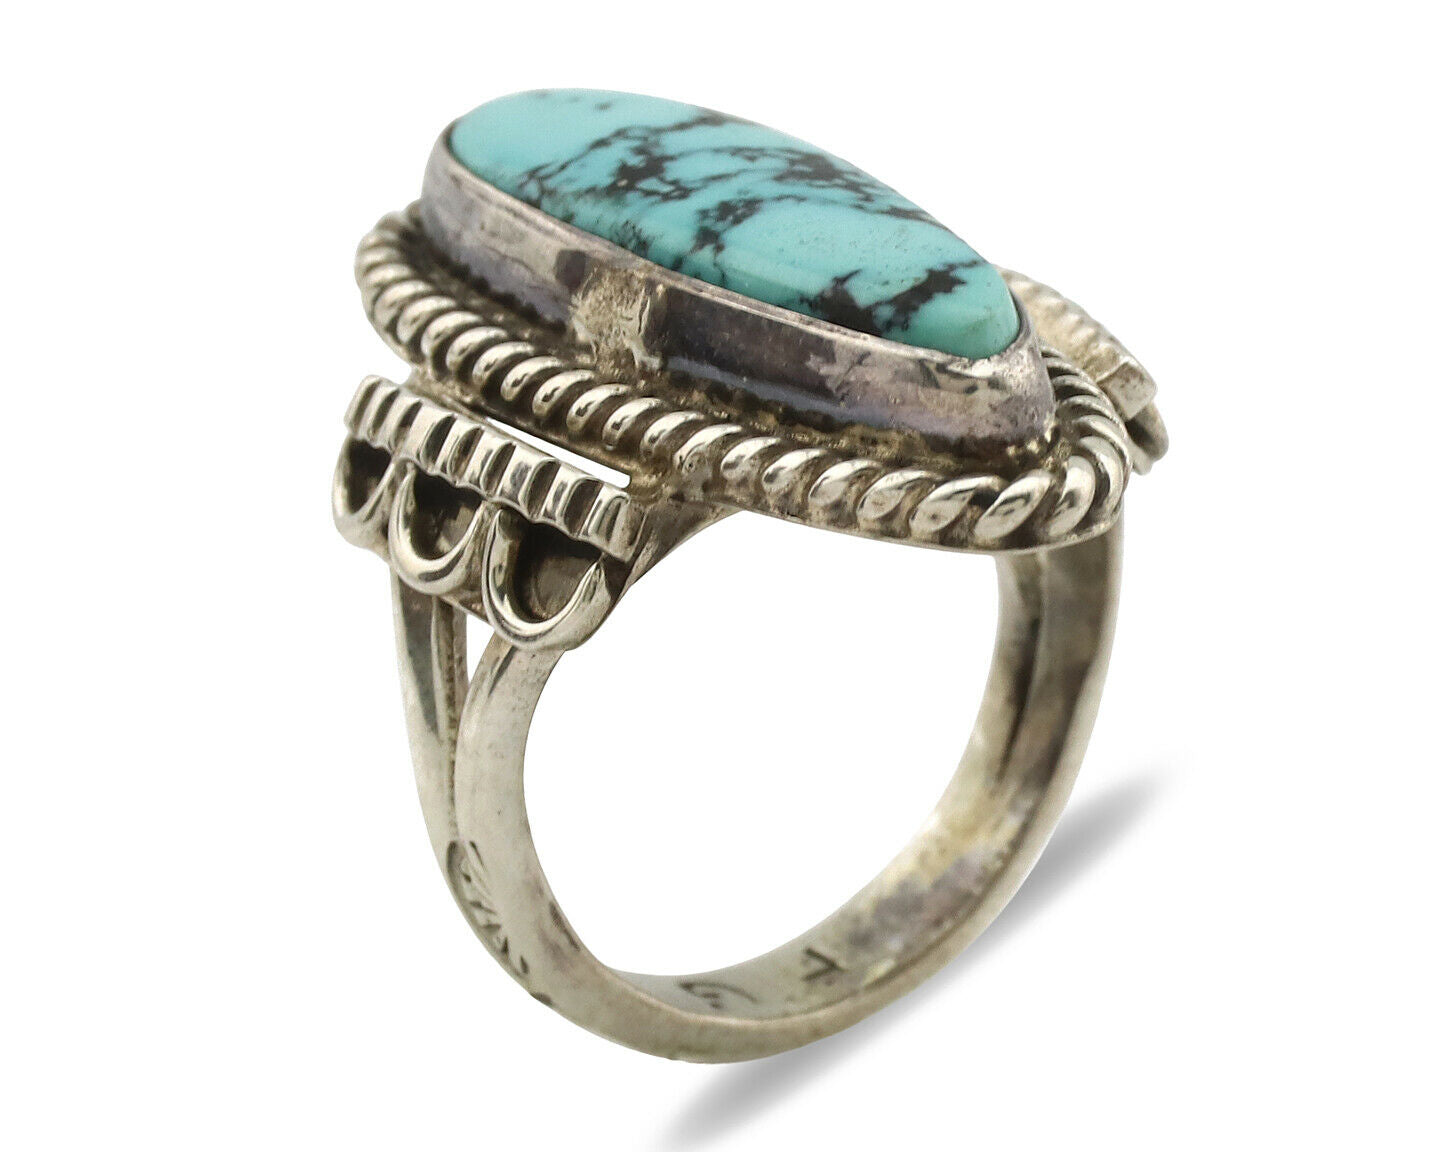 Navajo Ring .925 Silver Blue Spiderweb Turquoise Signed Fred Guerrero C.1980's